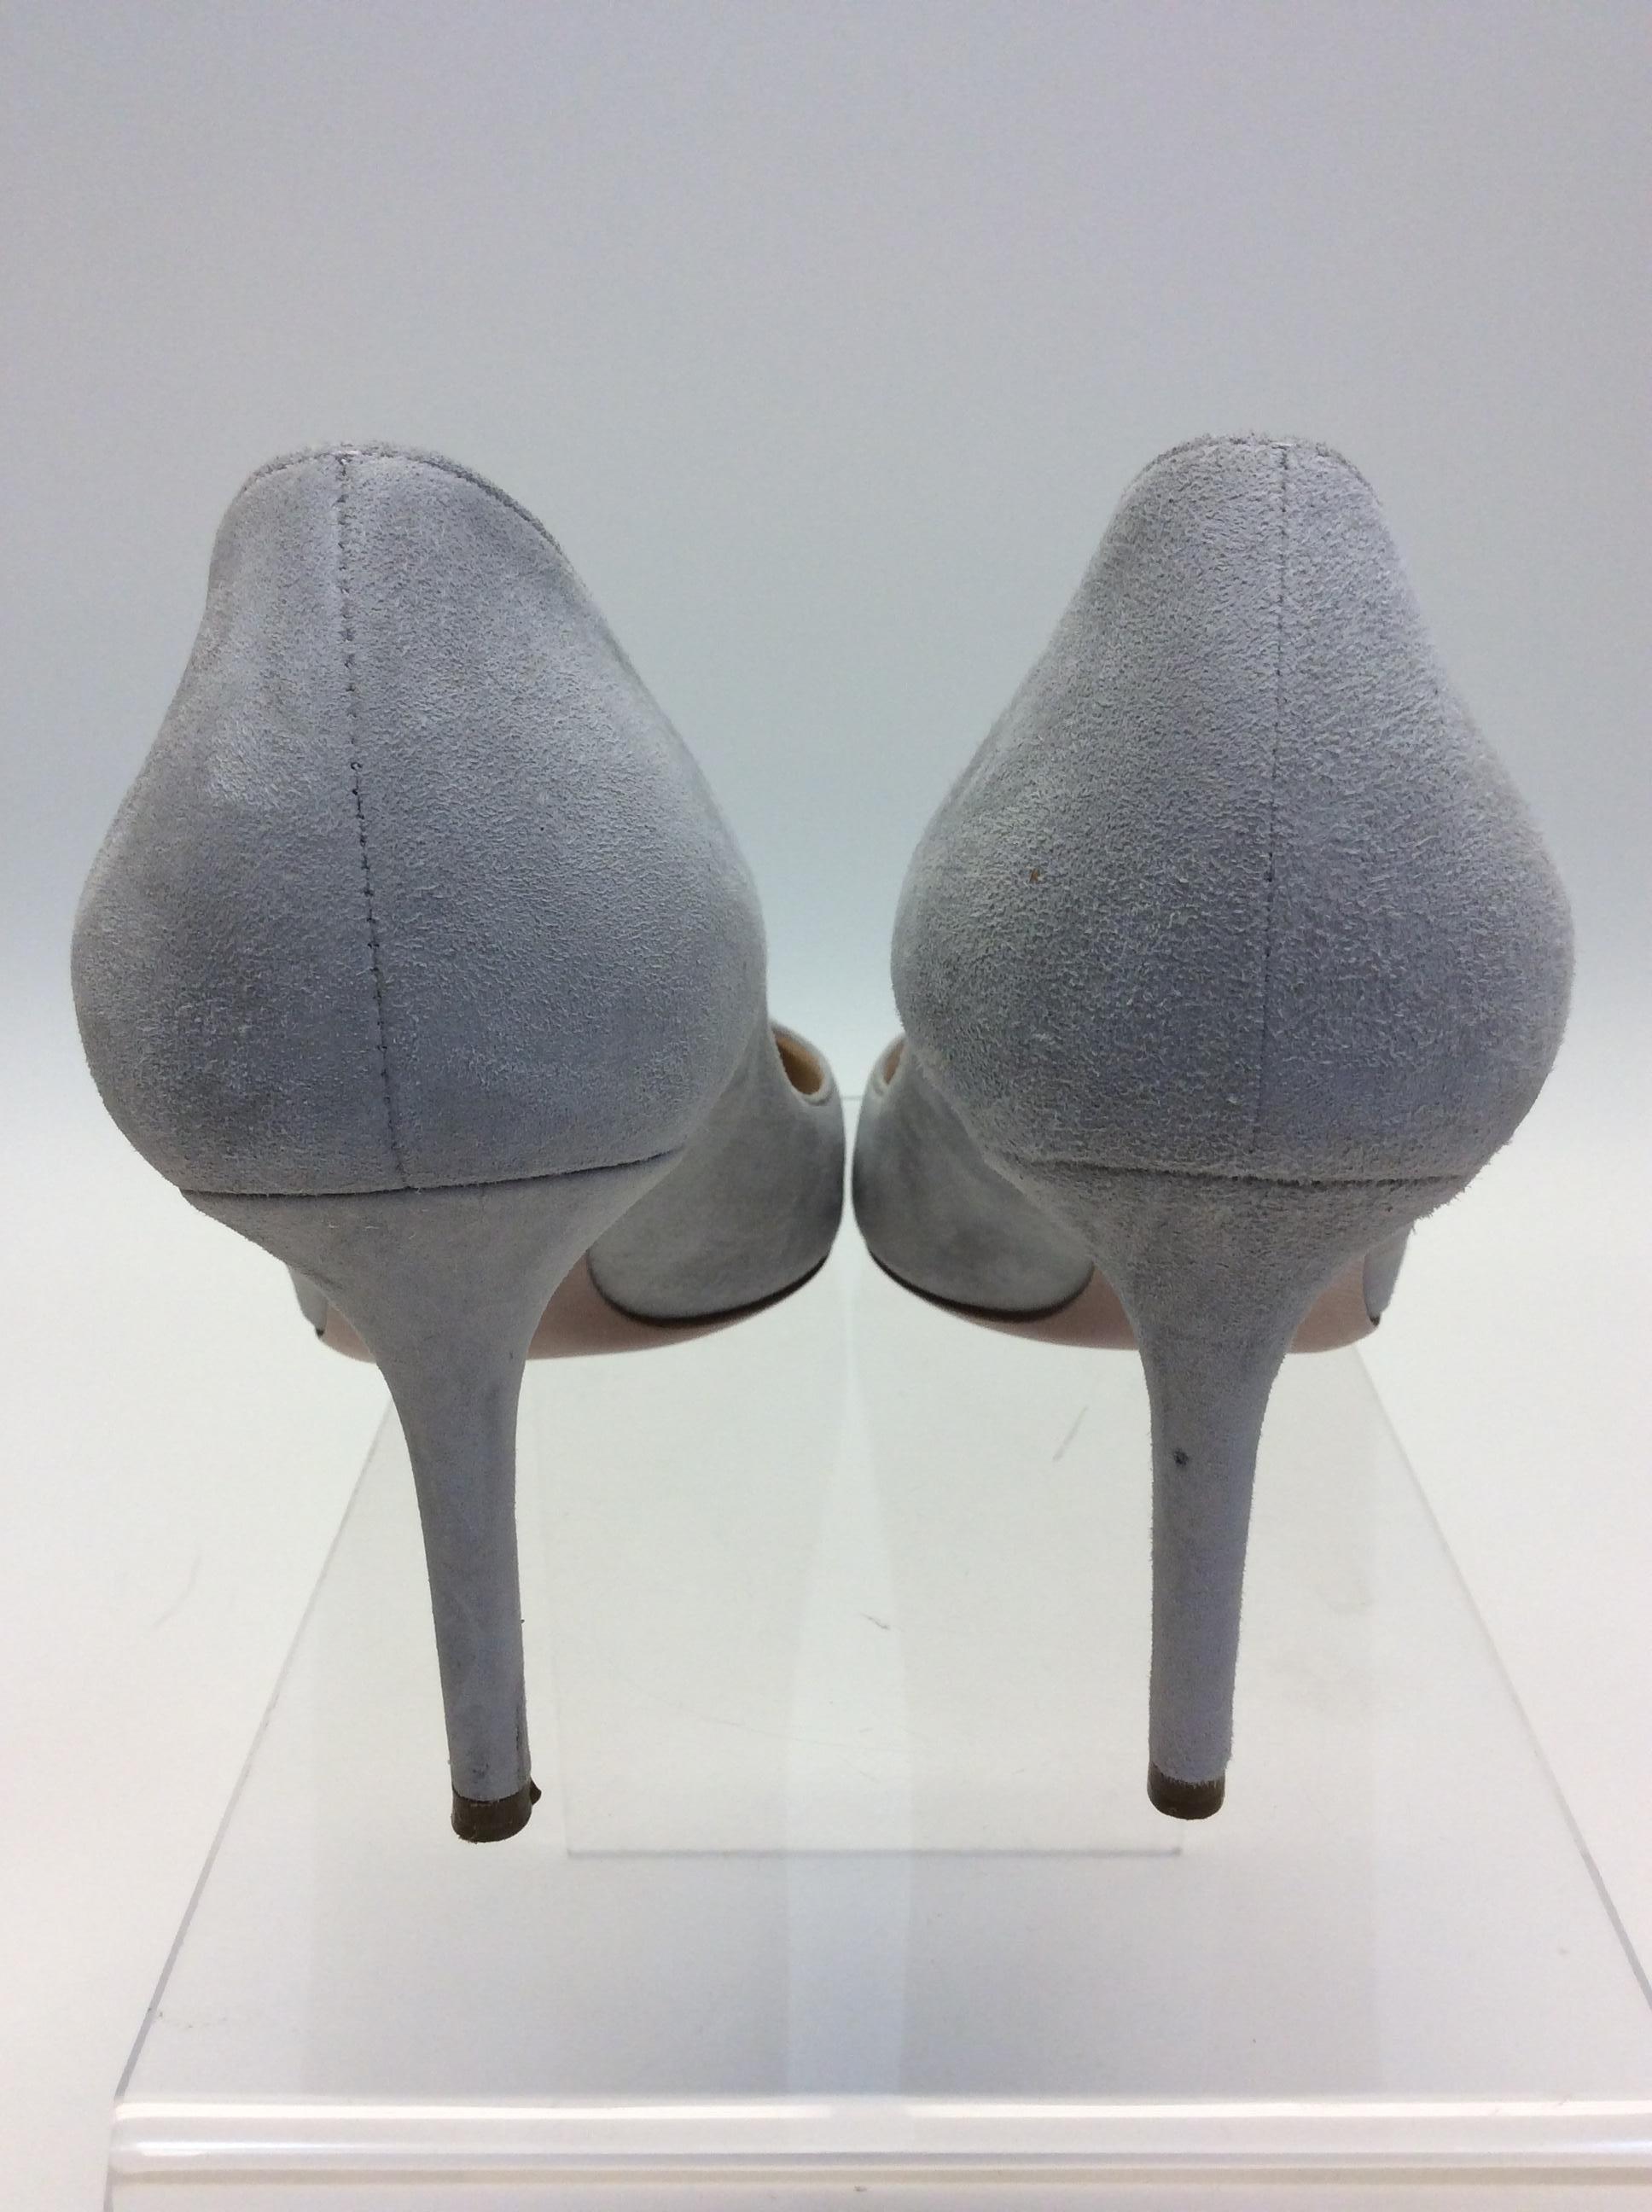 Prada Grey Suede Pump  In Excellent Condition For Sale In Narberth, PA